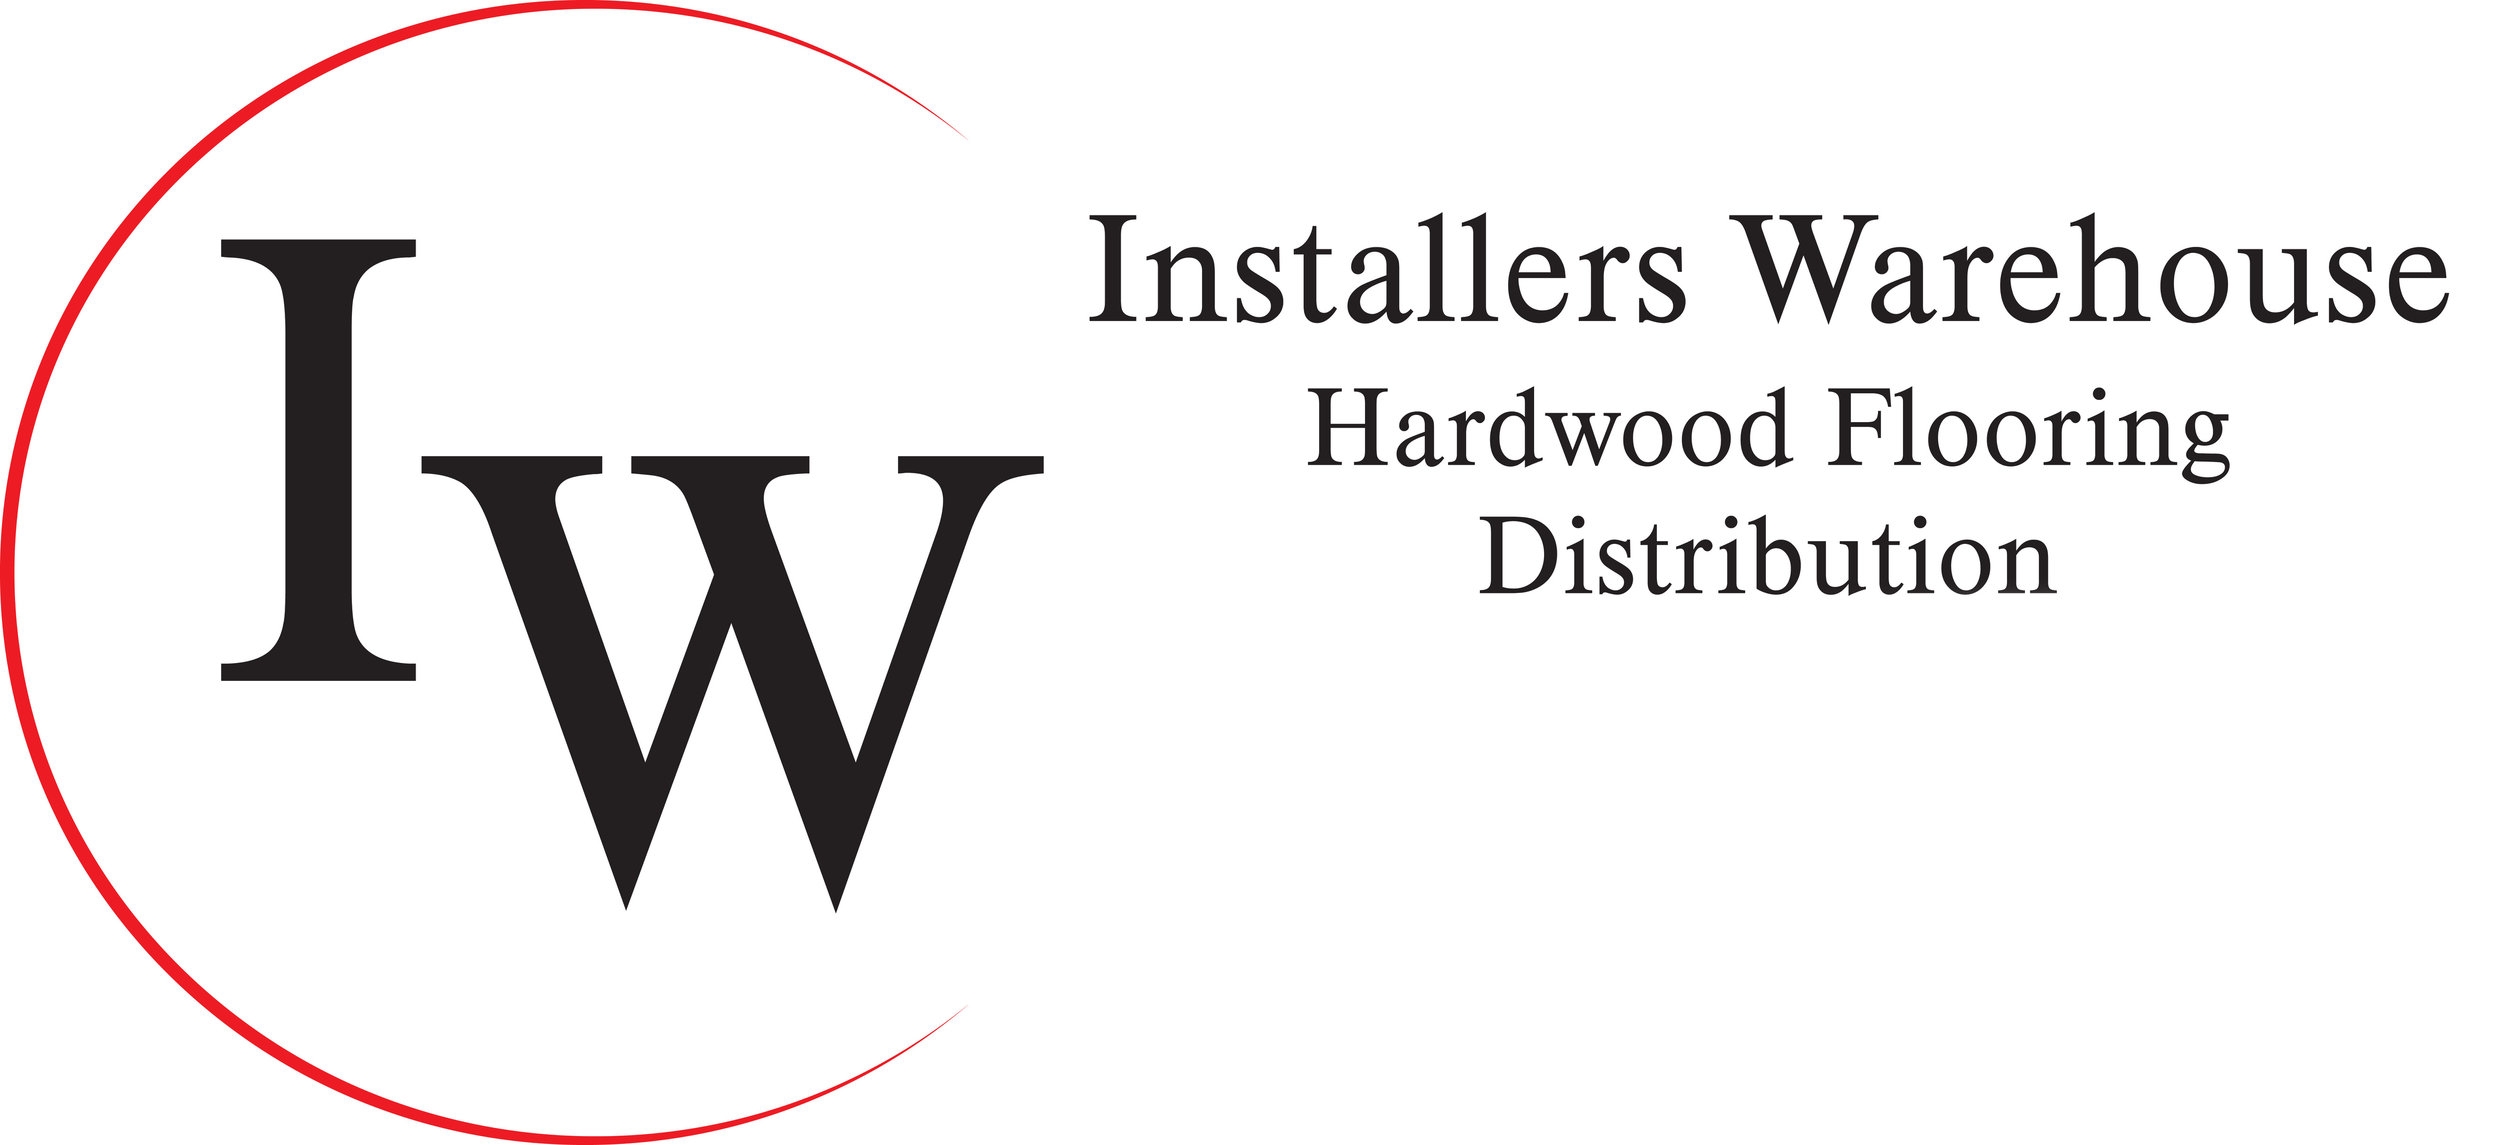 Installers Warehouse